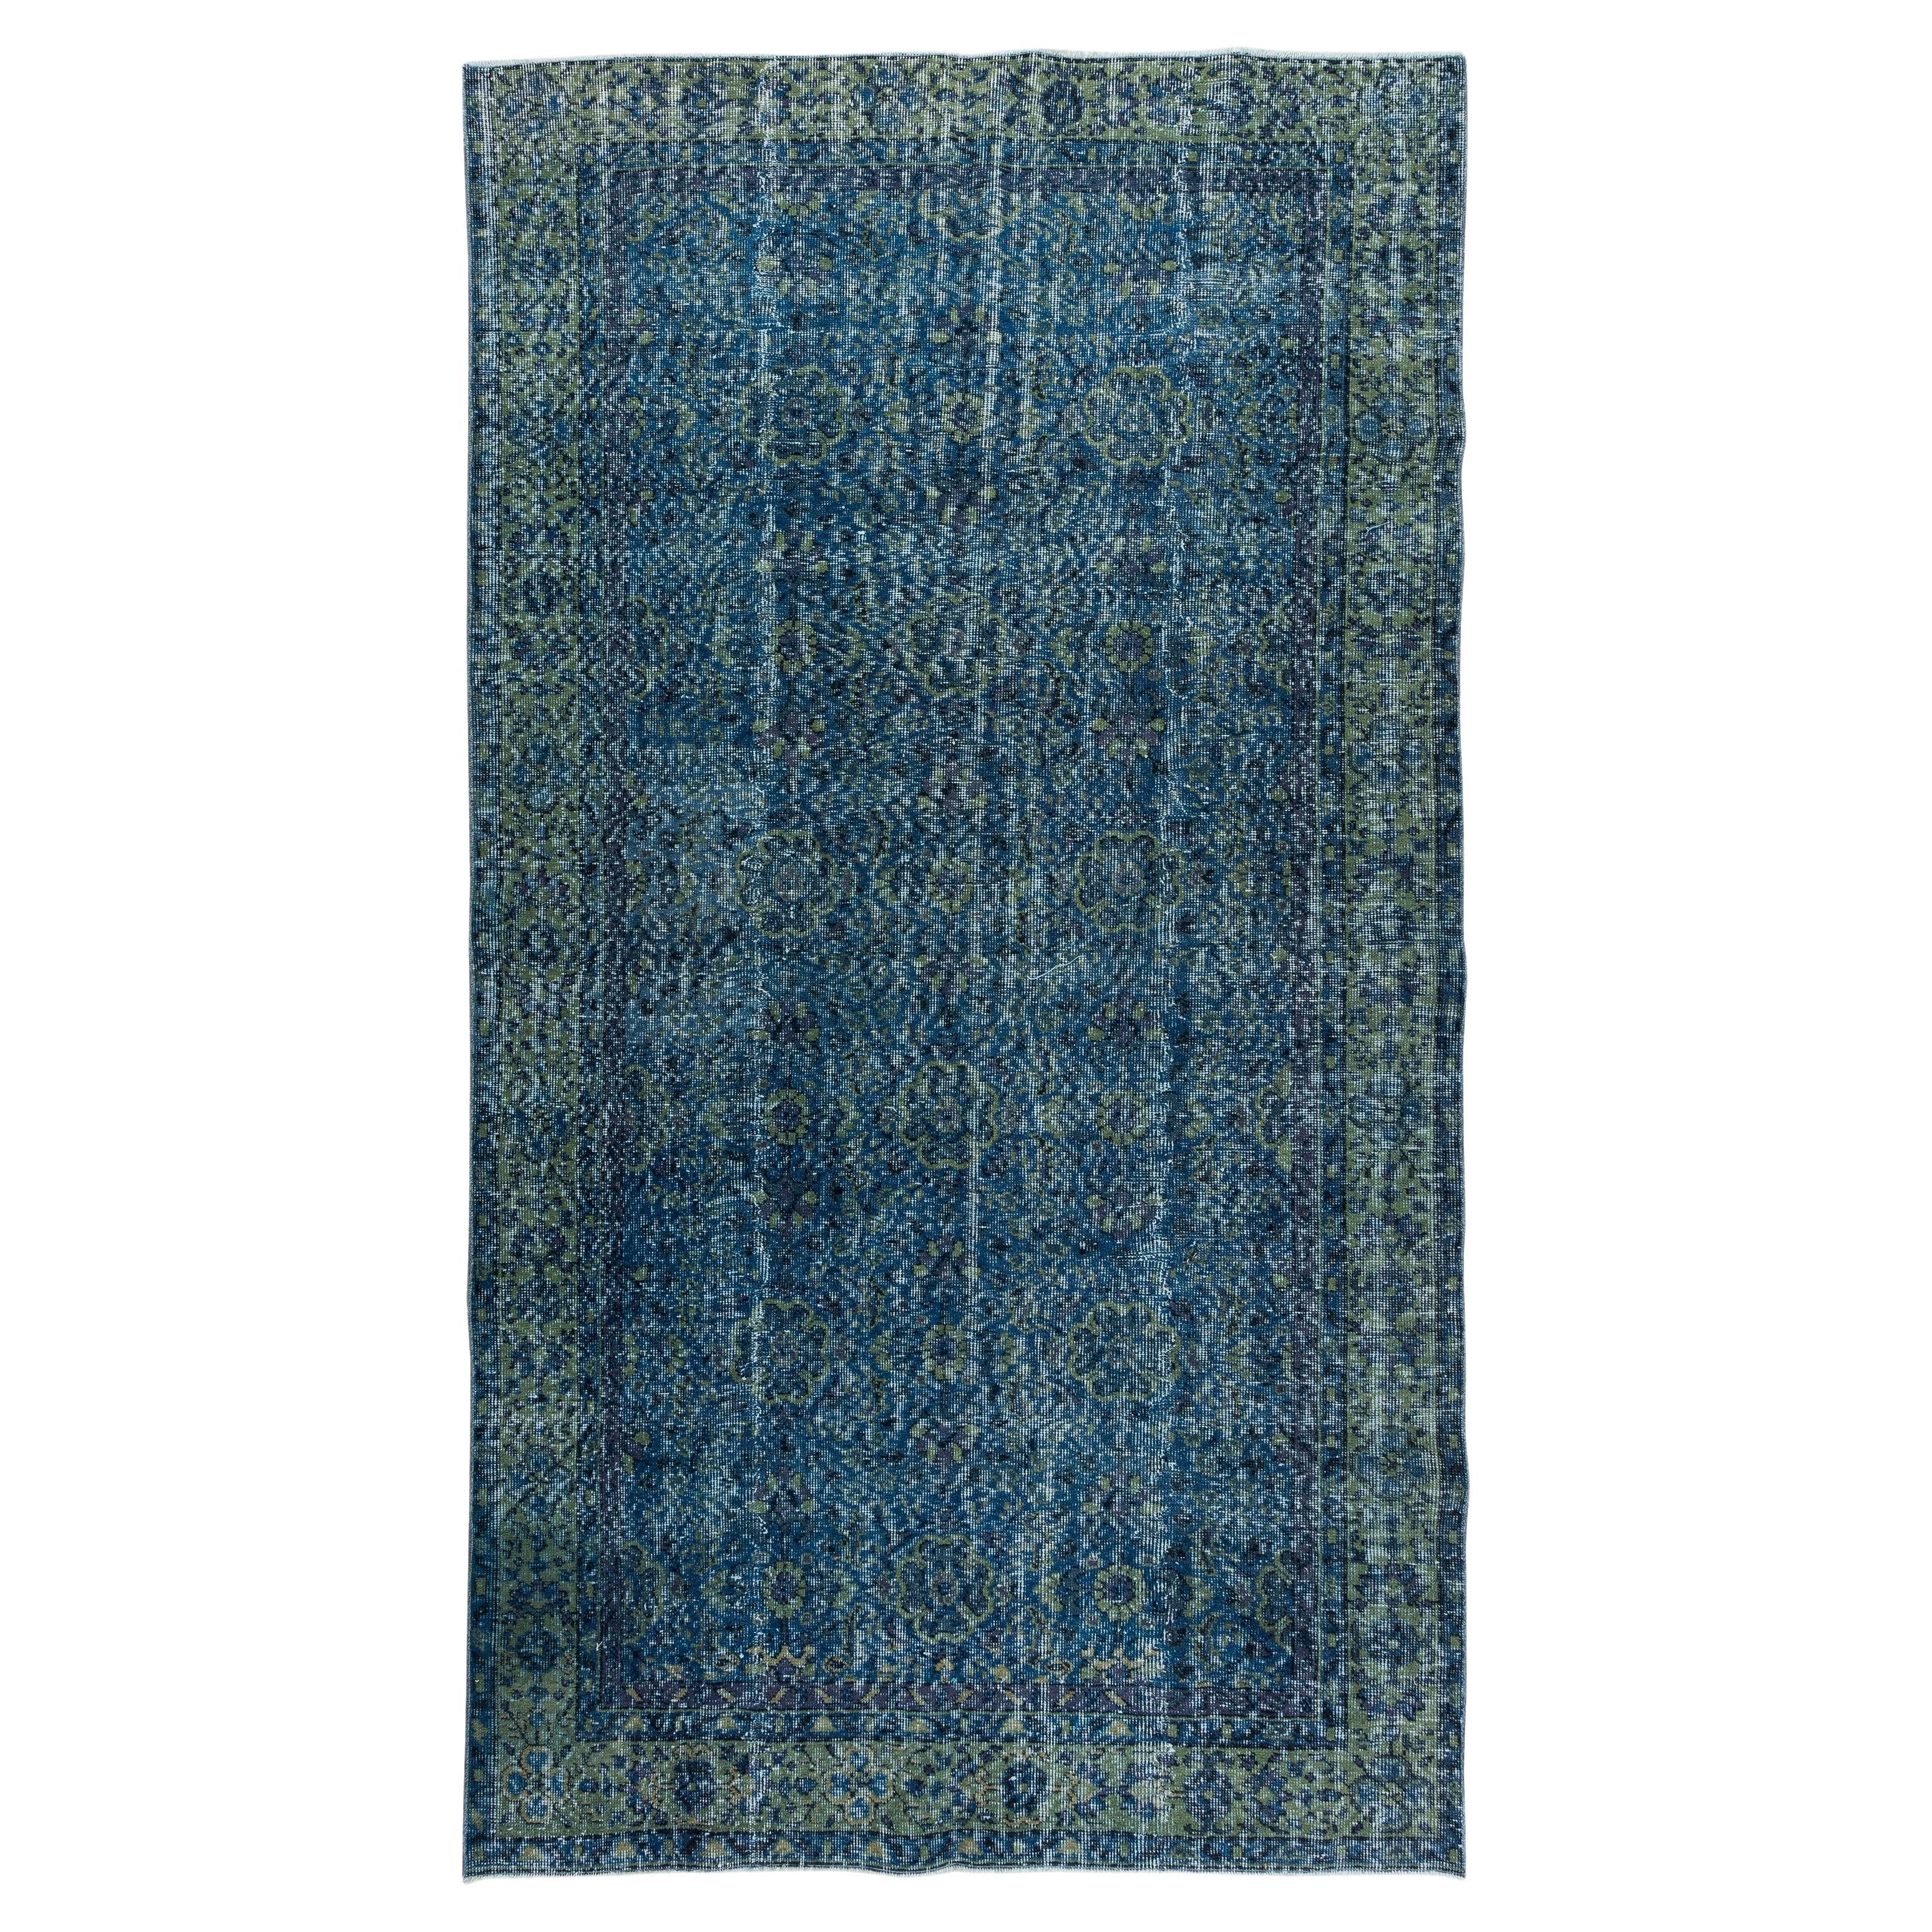 5.5x9.9 Ft Contemporary Blue Over-Dyed Rug, Handmade Vintage Turkish Wool Carpet